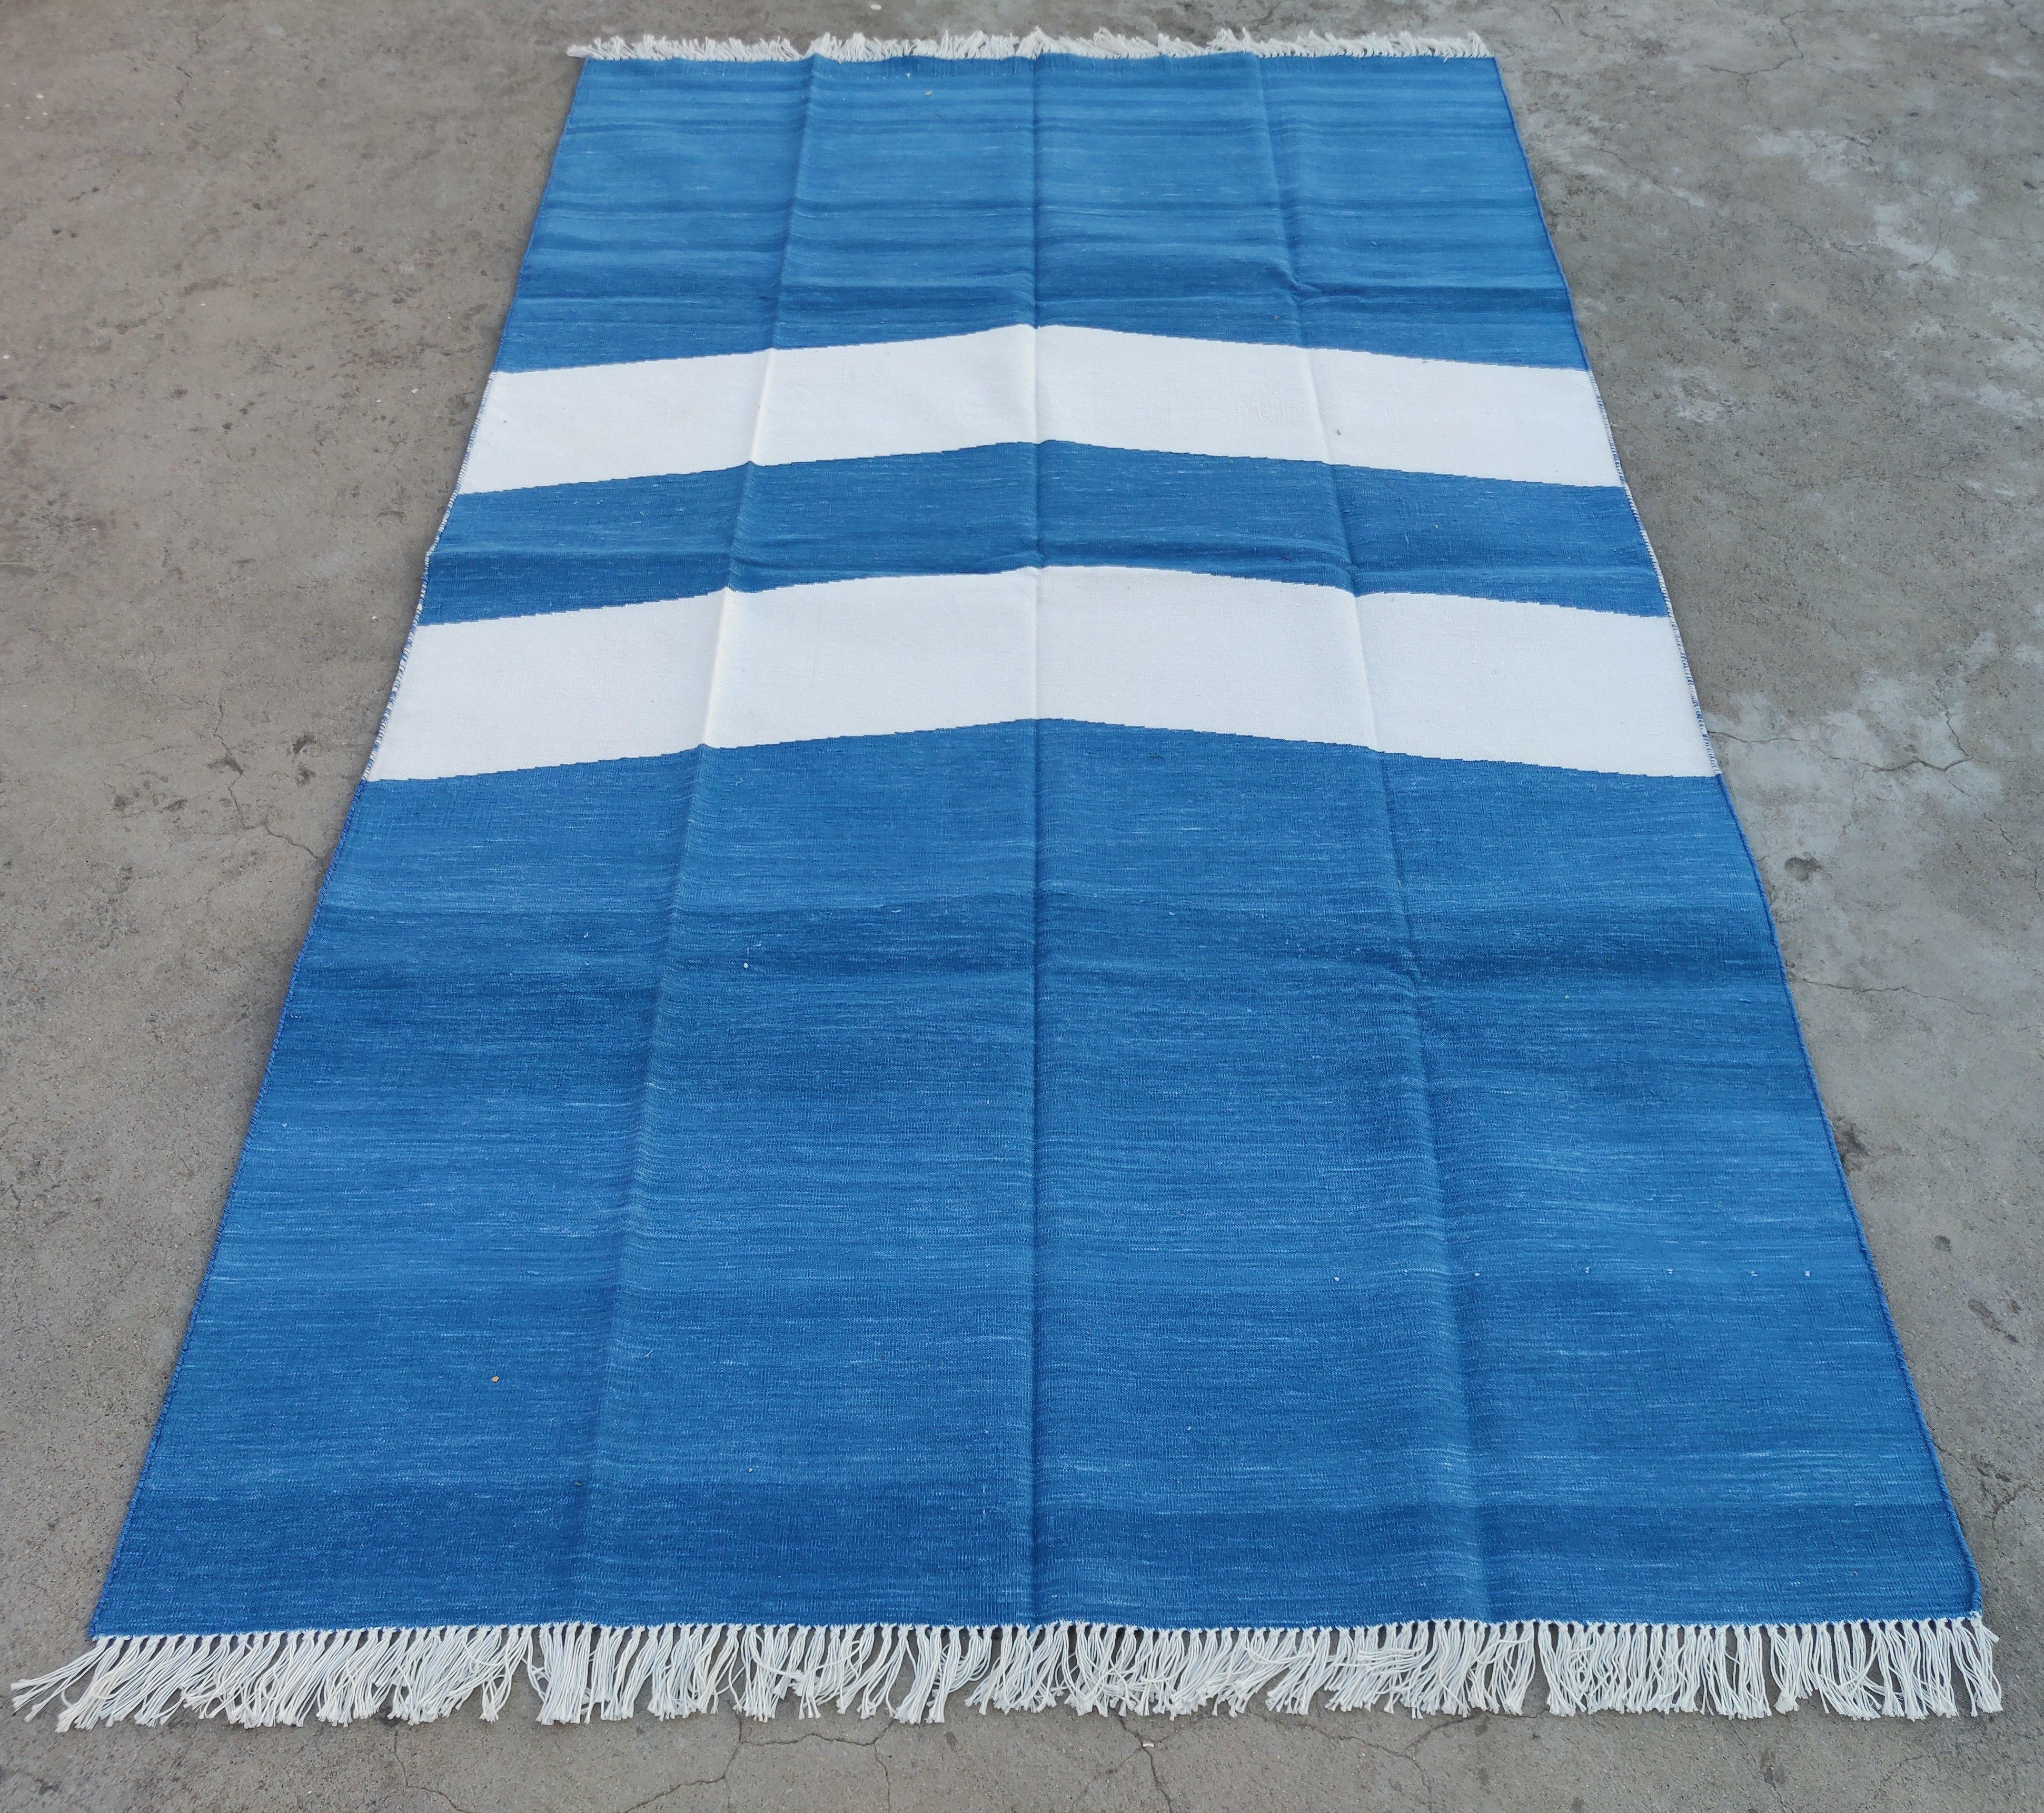 Handmade Cotton Area Flat Weave Rug, 5x8 Blue And White Striped Indian Dhurrie In New Condition For Sale In Jaipur, IN